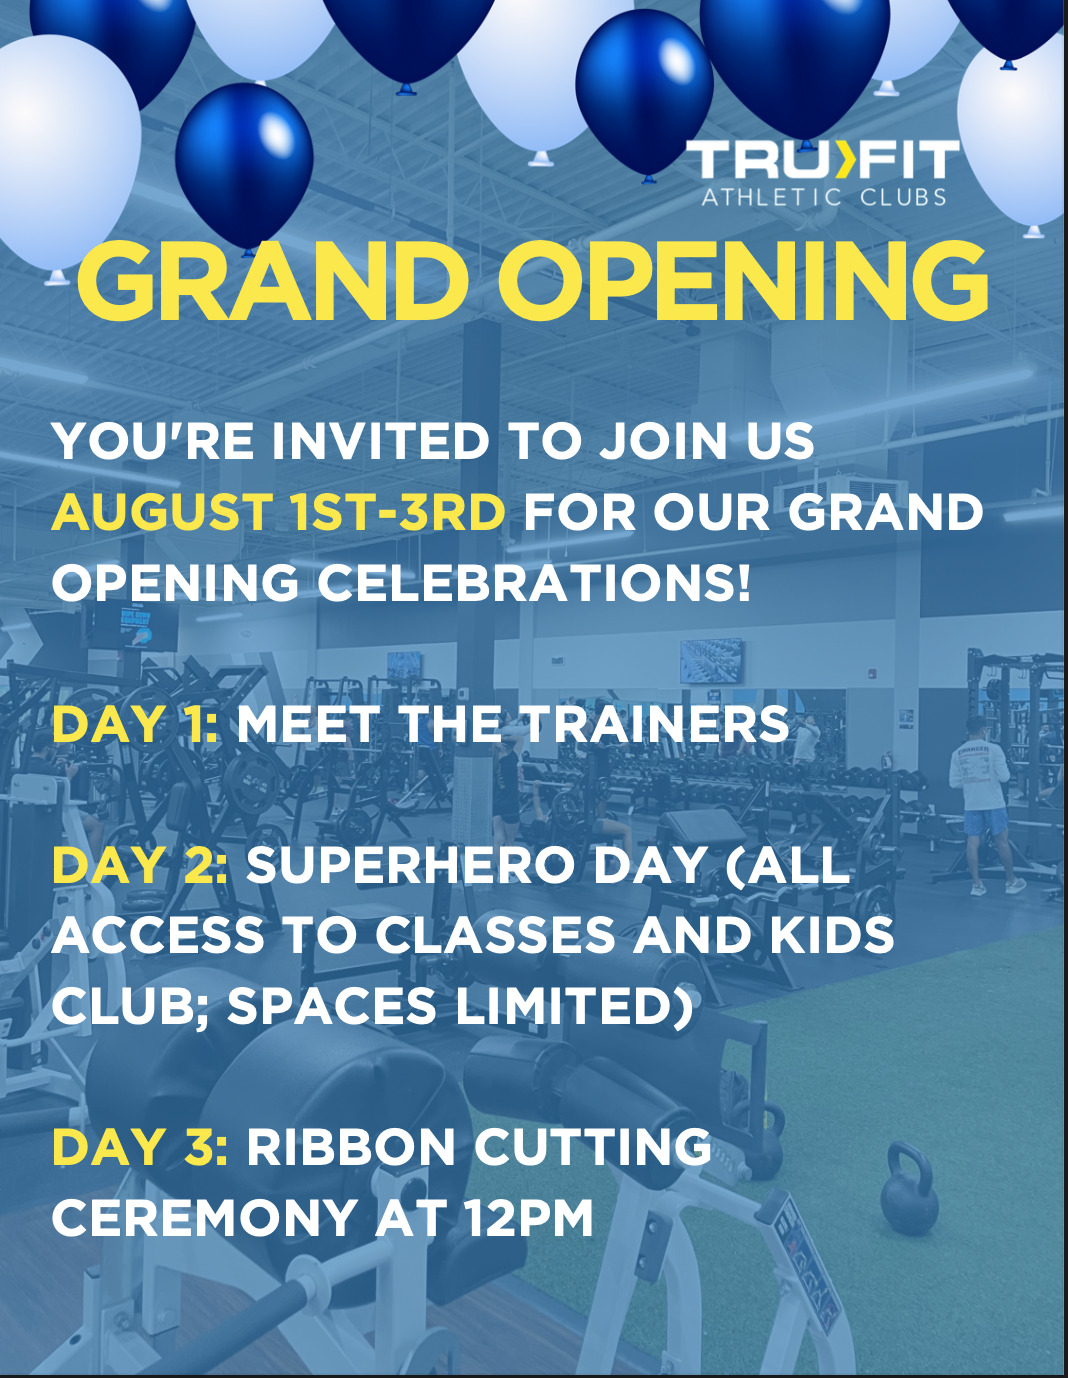 Trufit Athletic Club Grand Opening! - Madison Rivergate Area Chamber of  Commerce.